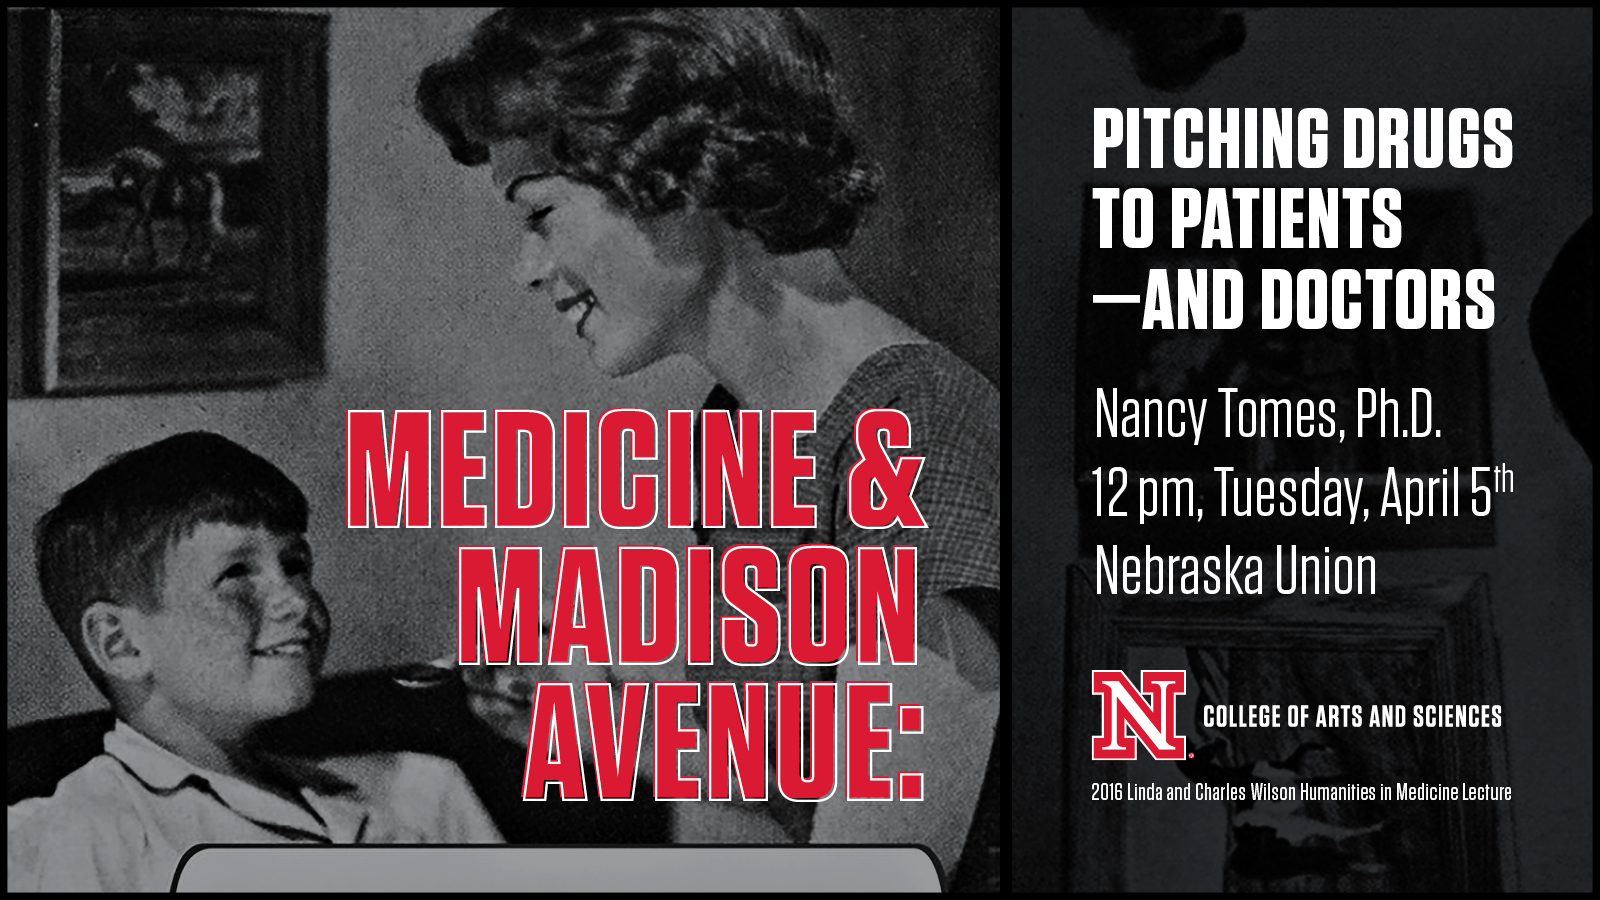 "Medicine and Madison Avenue" is April 5